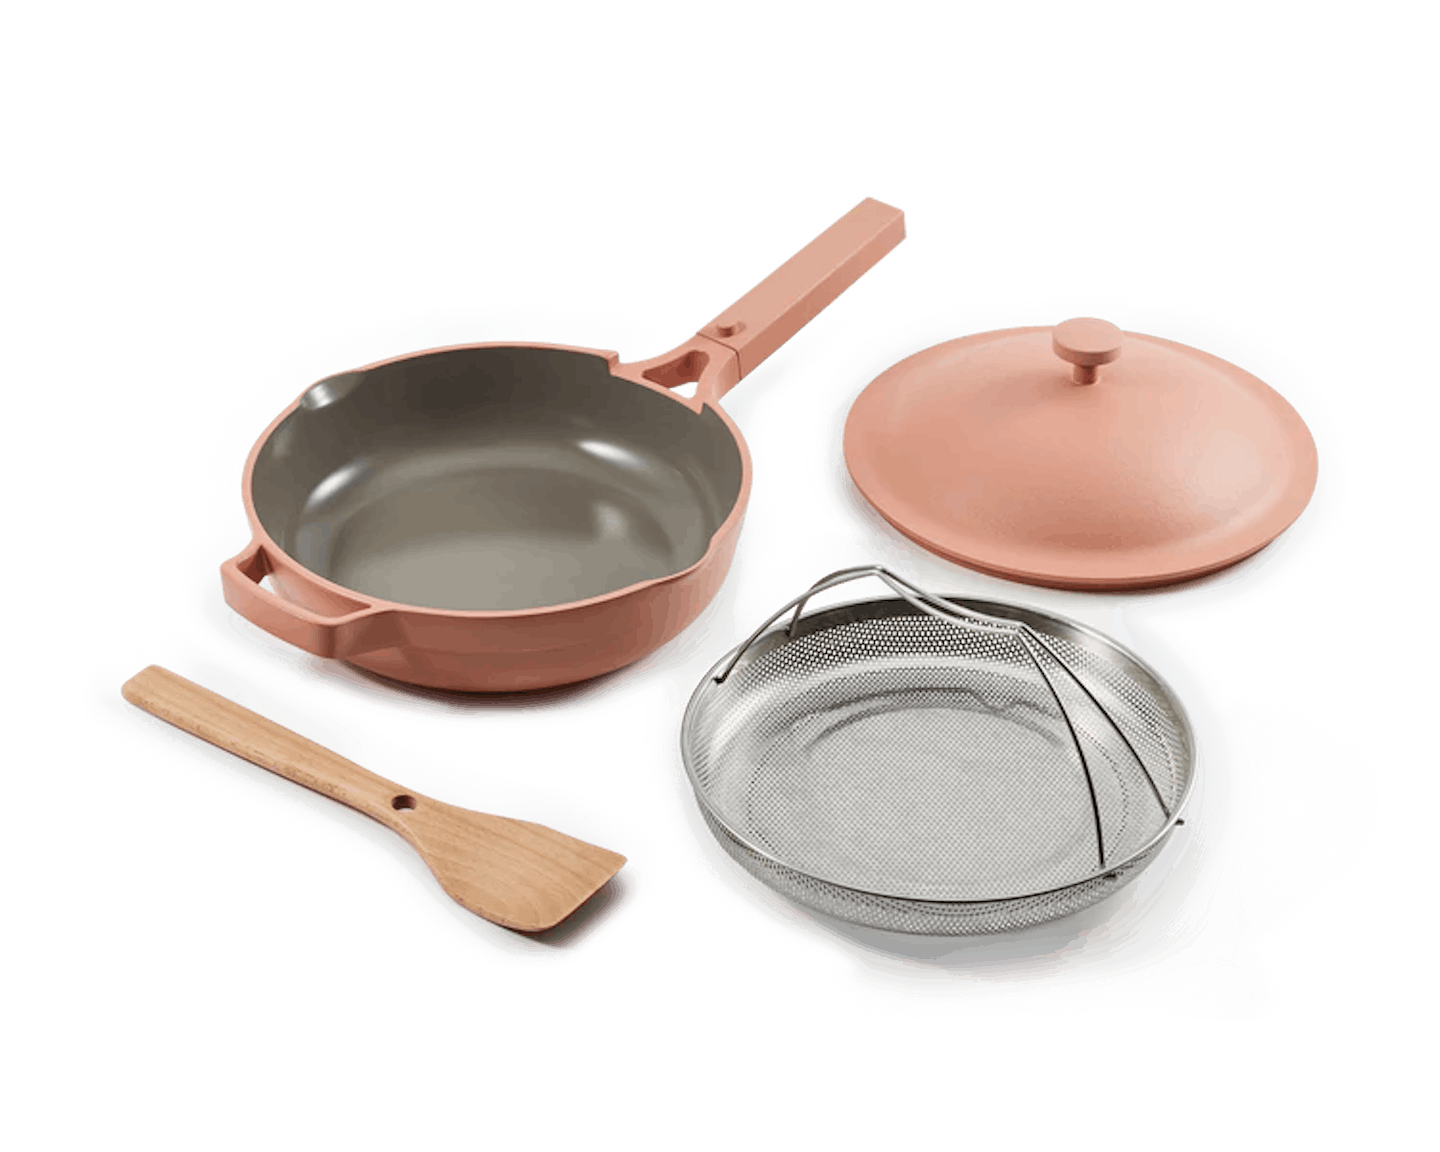 Which is the best non-stick fry pan? Our Place, Ninja, or Lakeland?